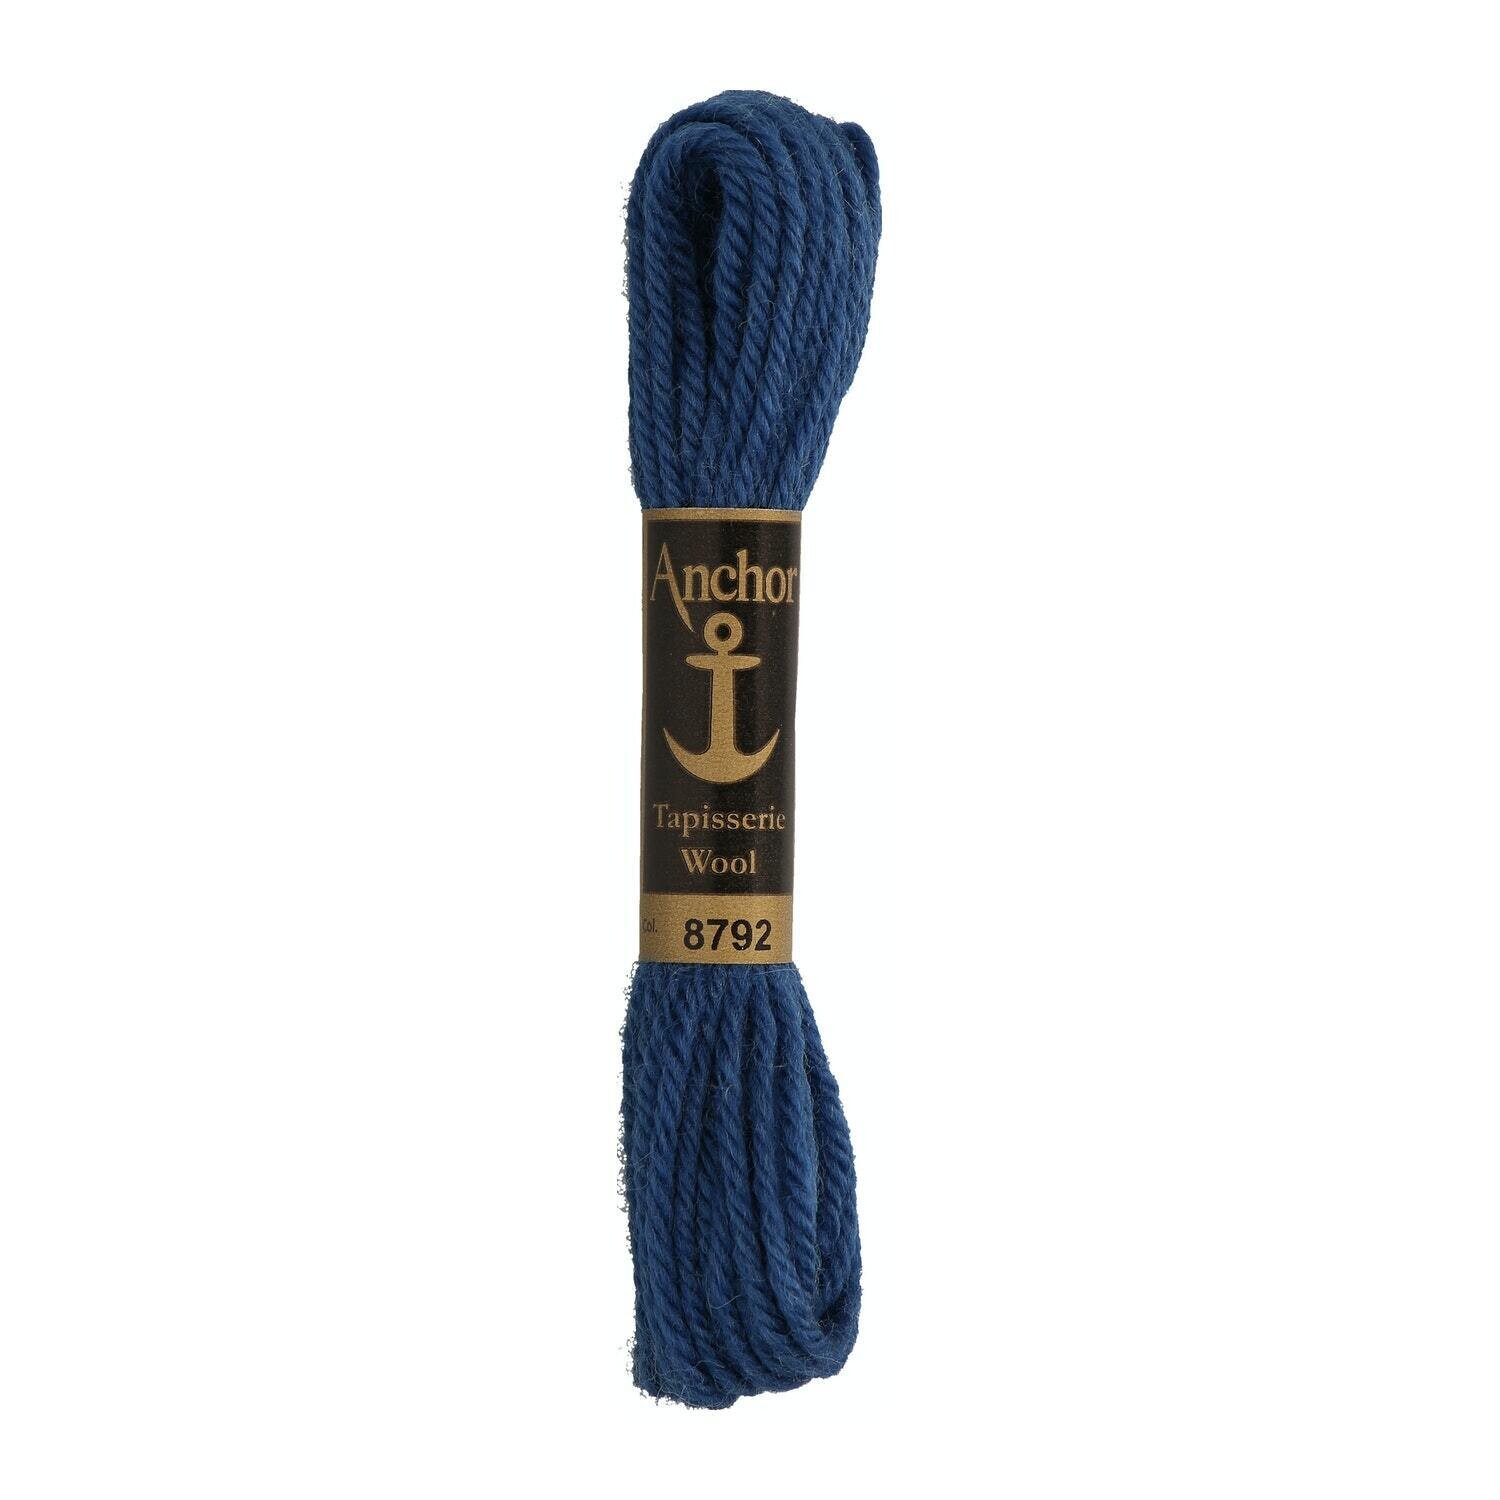 Anchor Tapisserie Wool #08792